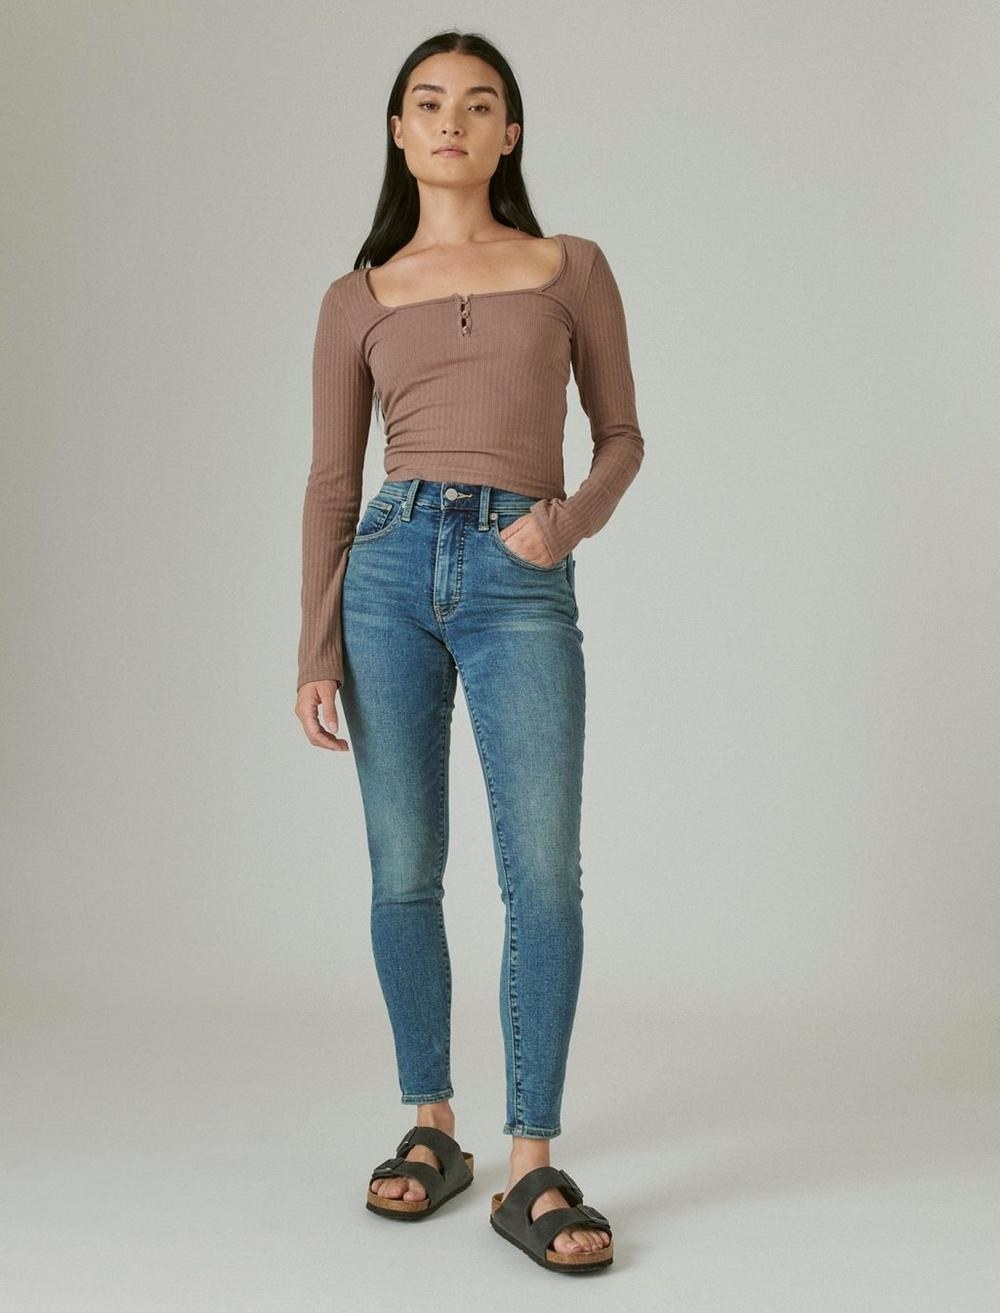 model wearing a brown top and high-rise jeans